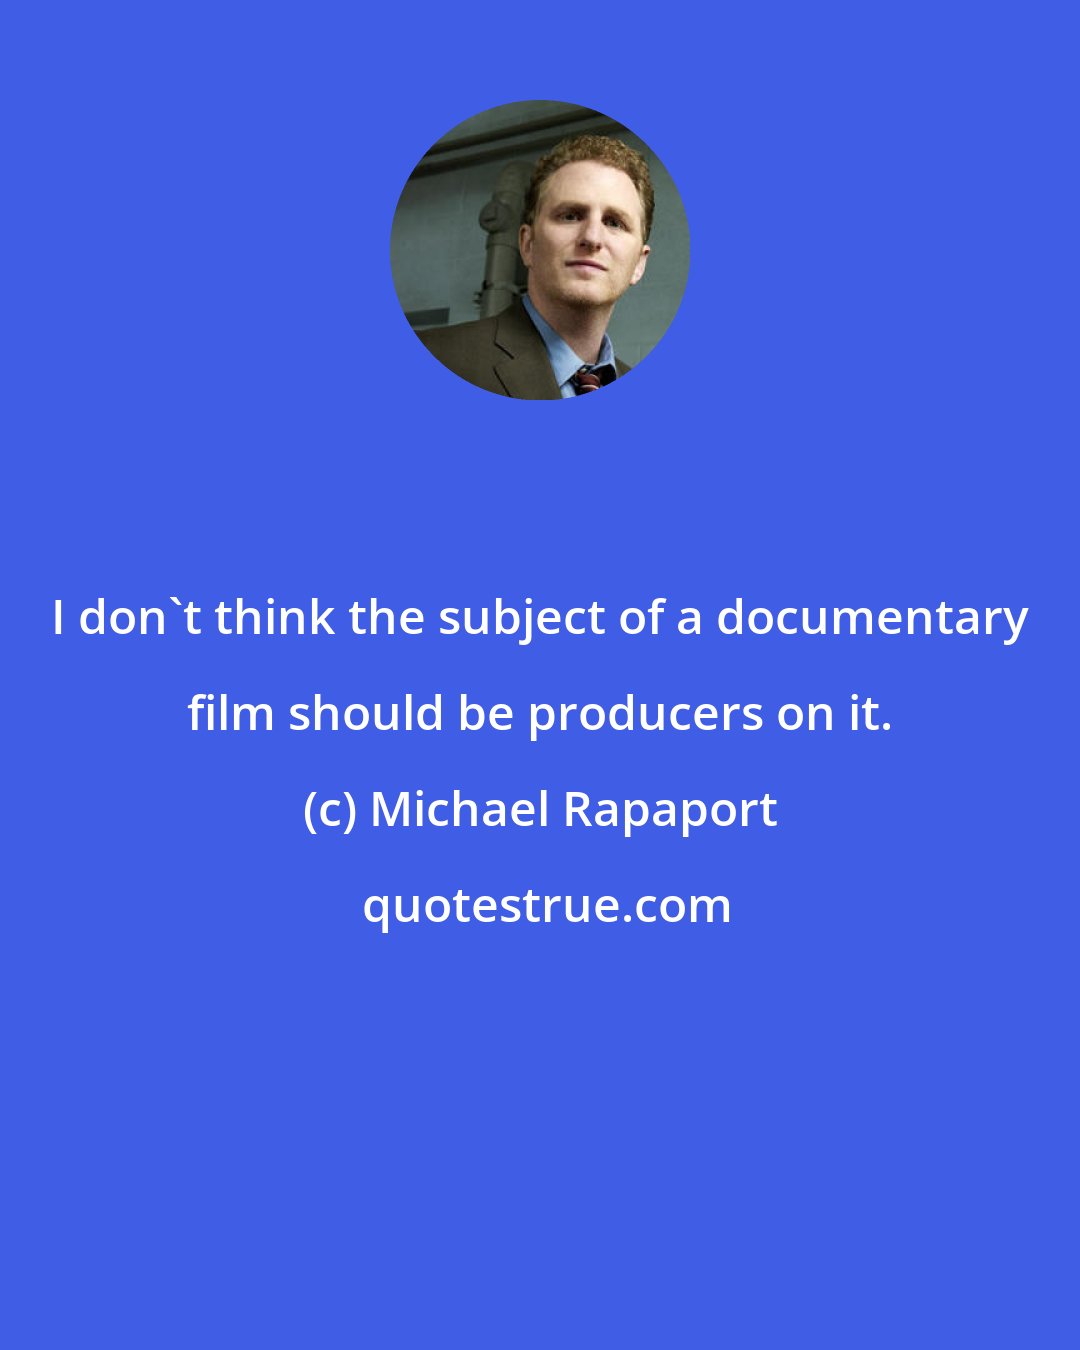 Michael Rapaport: I don't think the subject of a documentary film should be producers on it.